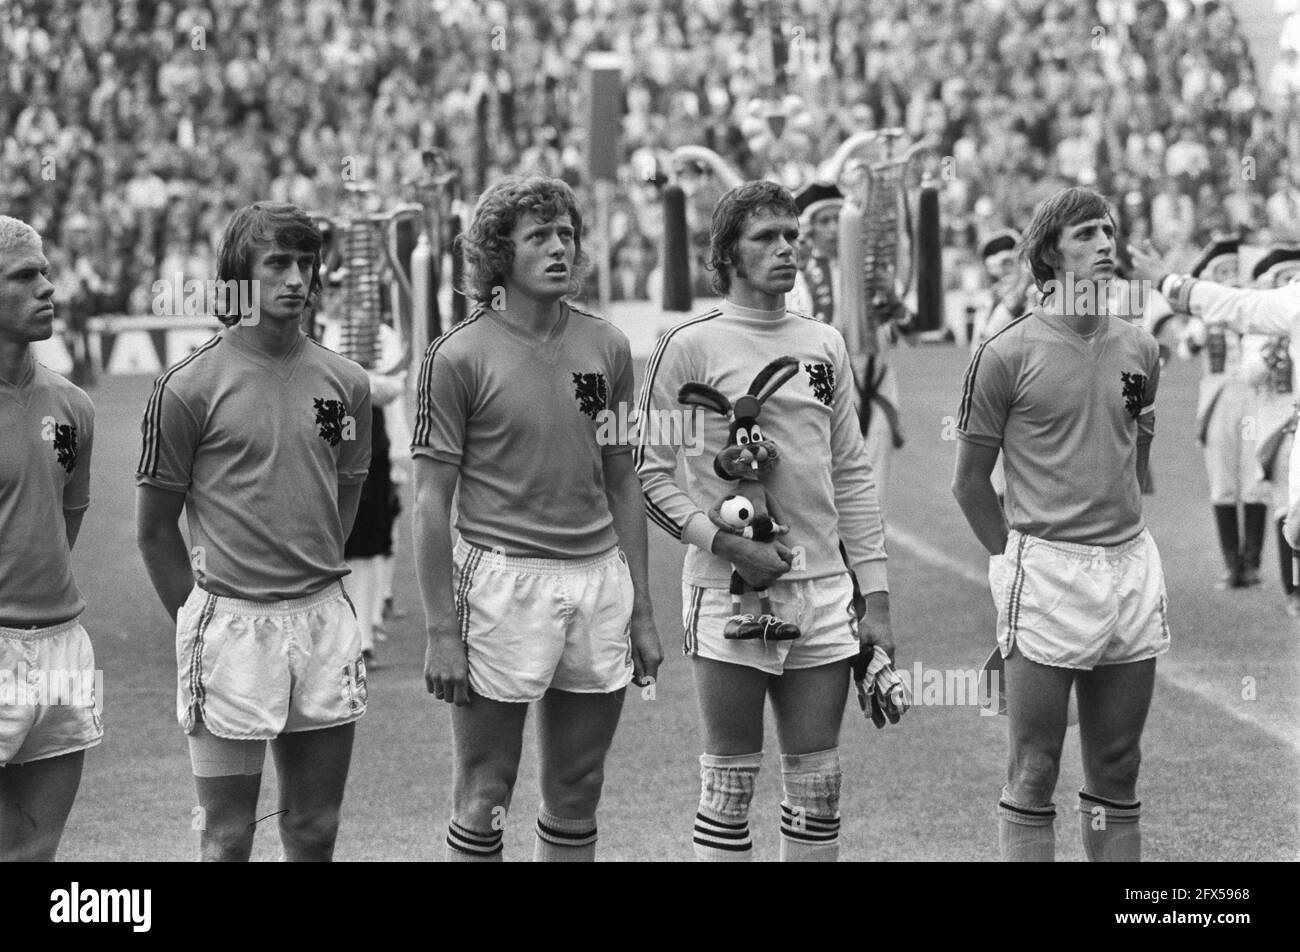 World Cup final 1974 in Munich, West Germany v. Netherlands 2-1; No. 10 West German team during national anthem, Nos. 8, 9, 11, July 7, 1974, PEOPLE, teams, sports, soccer, world championships, The Netherlands, 20th century press agency photo, news to remember, documentary, historic photography 1945-1990, visual stories, human history of the Twentieth Century, capturing moments in time Stock Photo